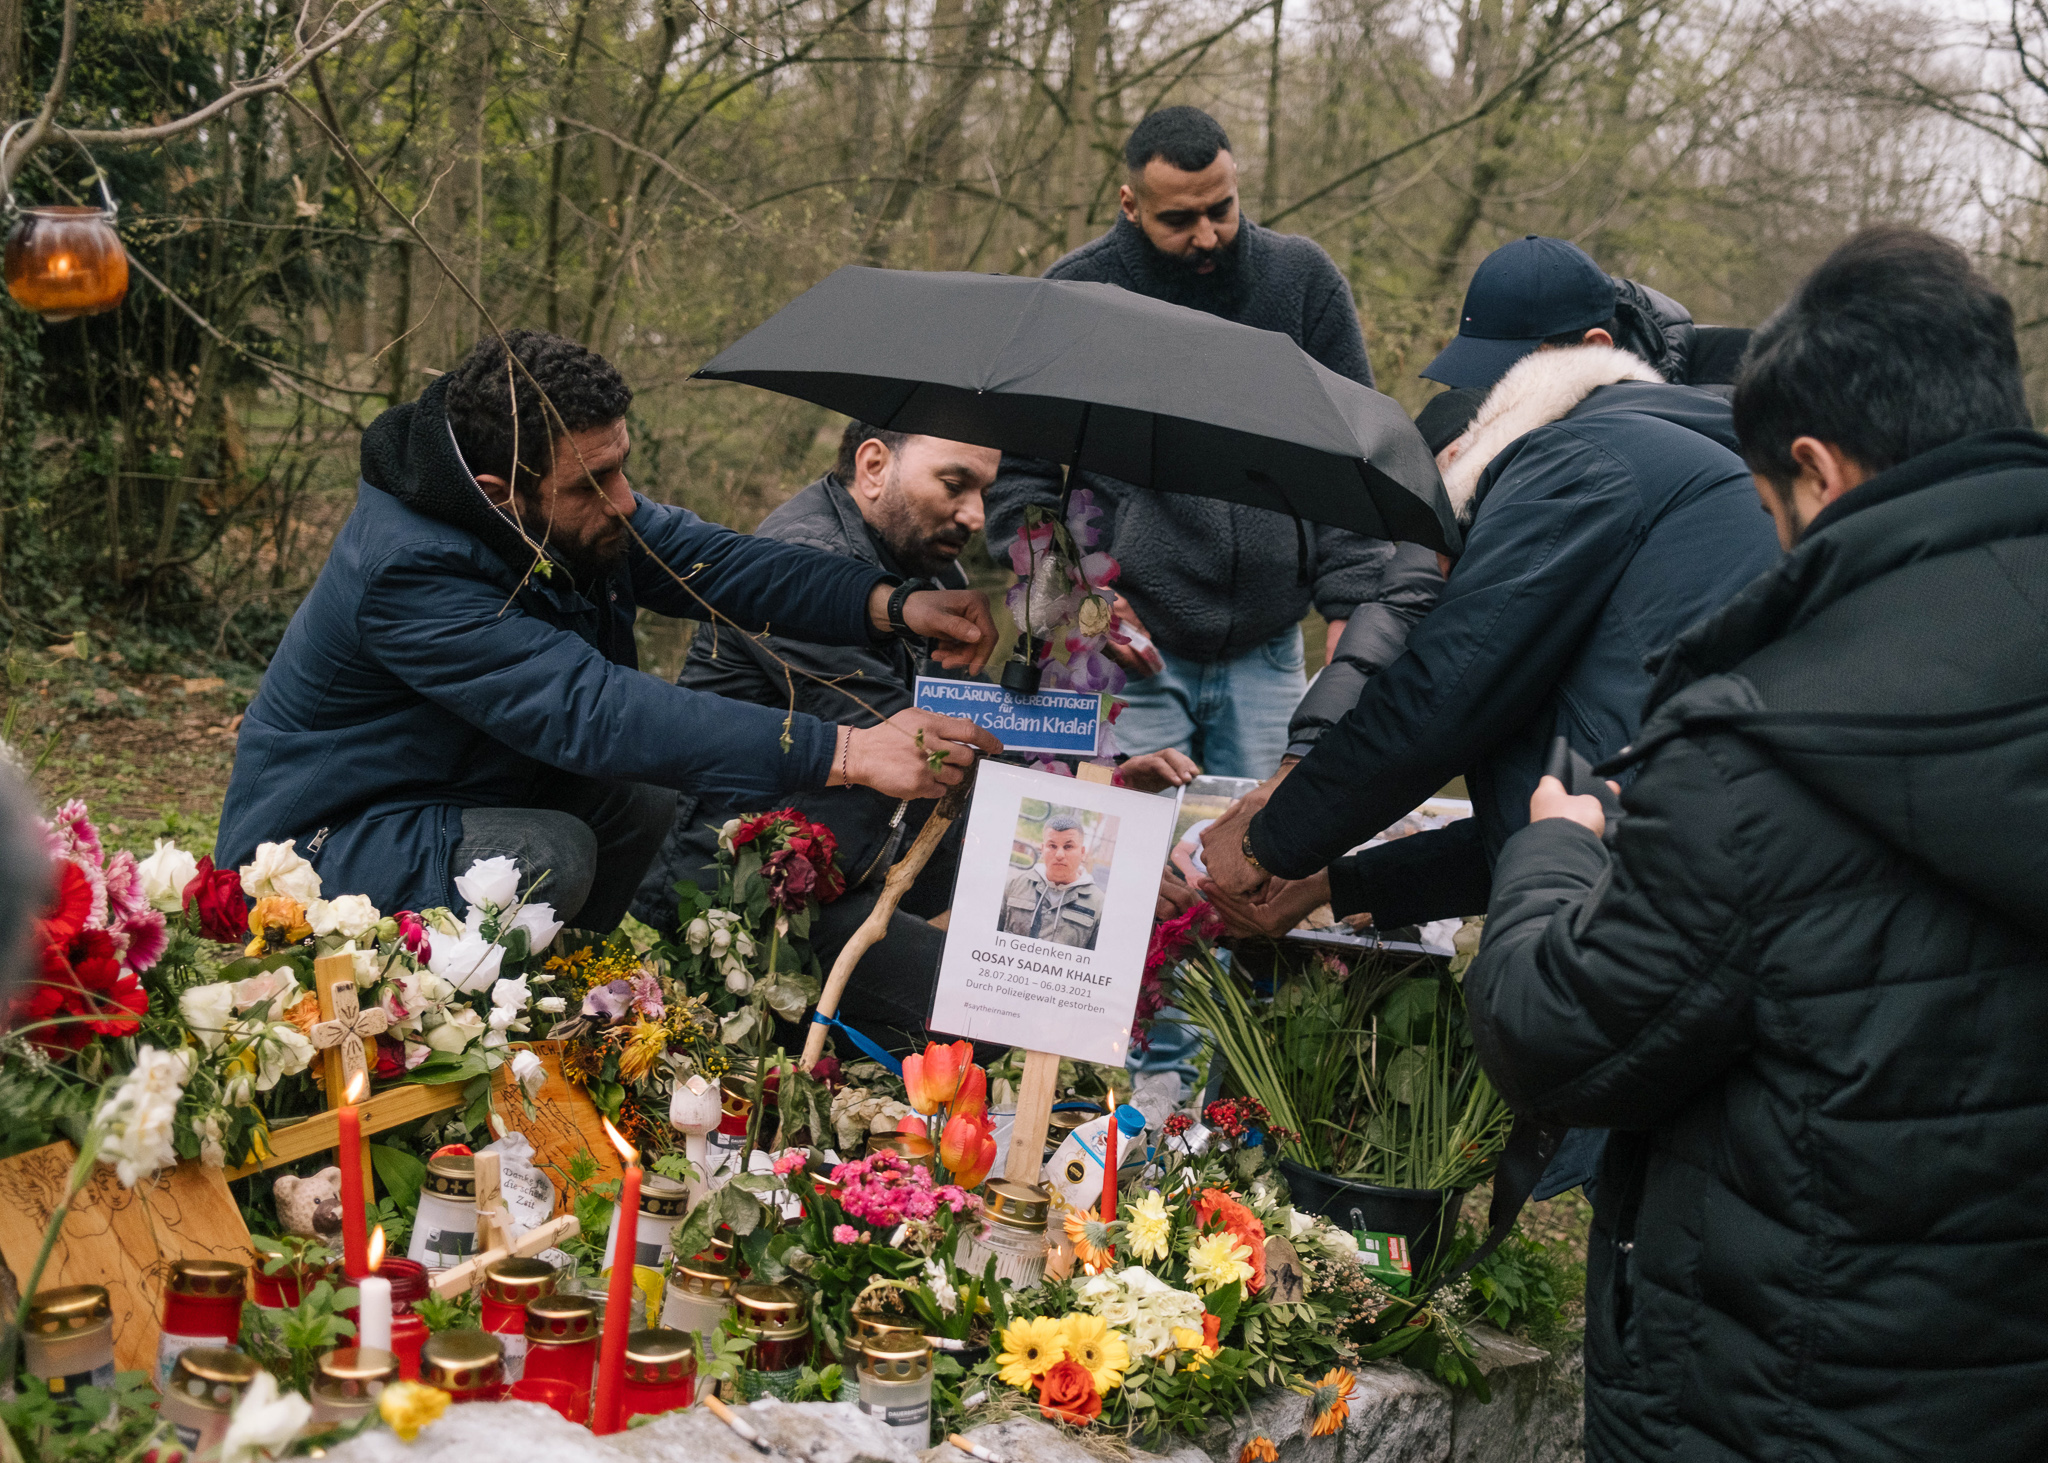 Relatives and friends of Qosay Khalaf set up flowers and candles at the Wollepark in Delmenhorst, where he was controlled. Delmenhorst, April 4th, 2021